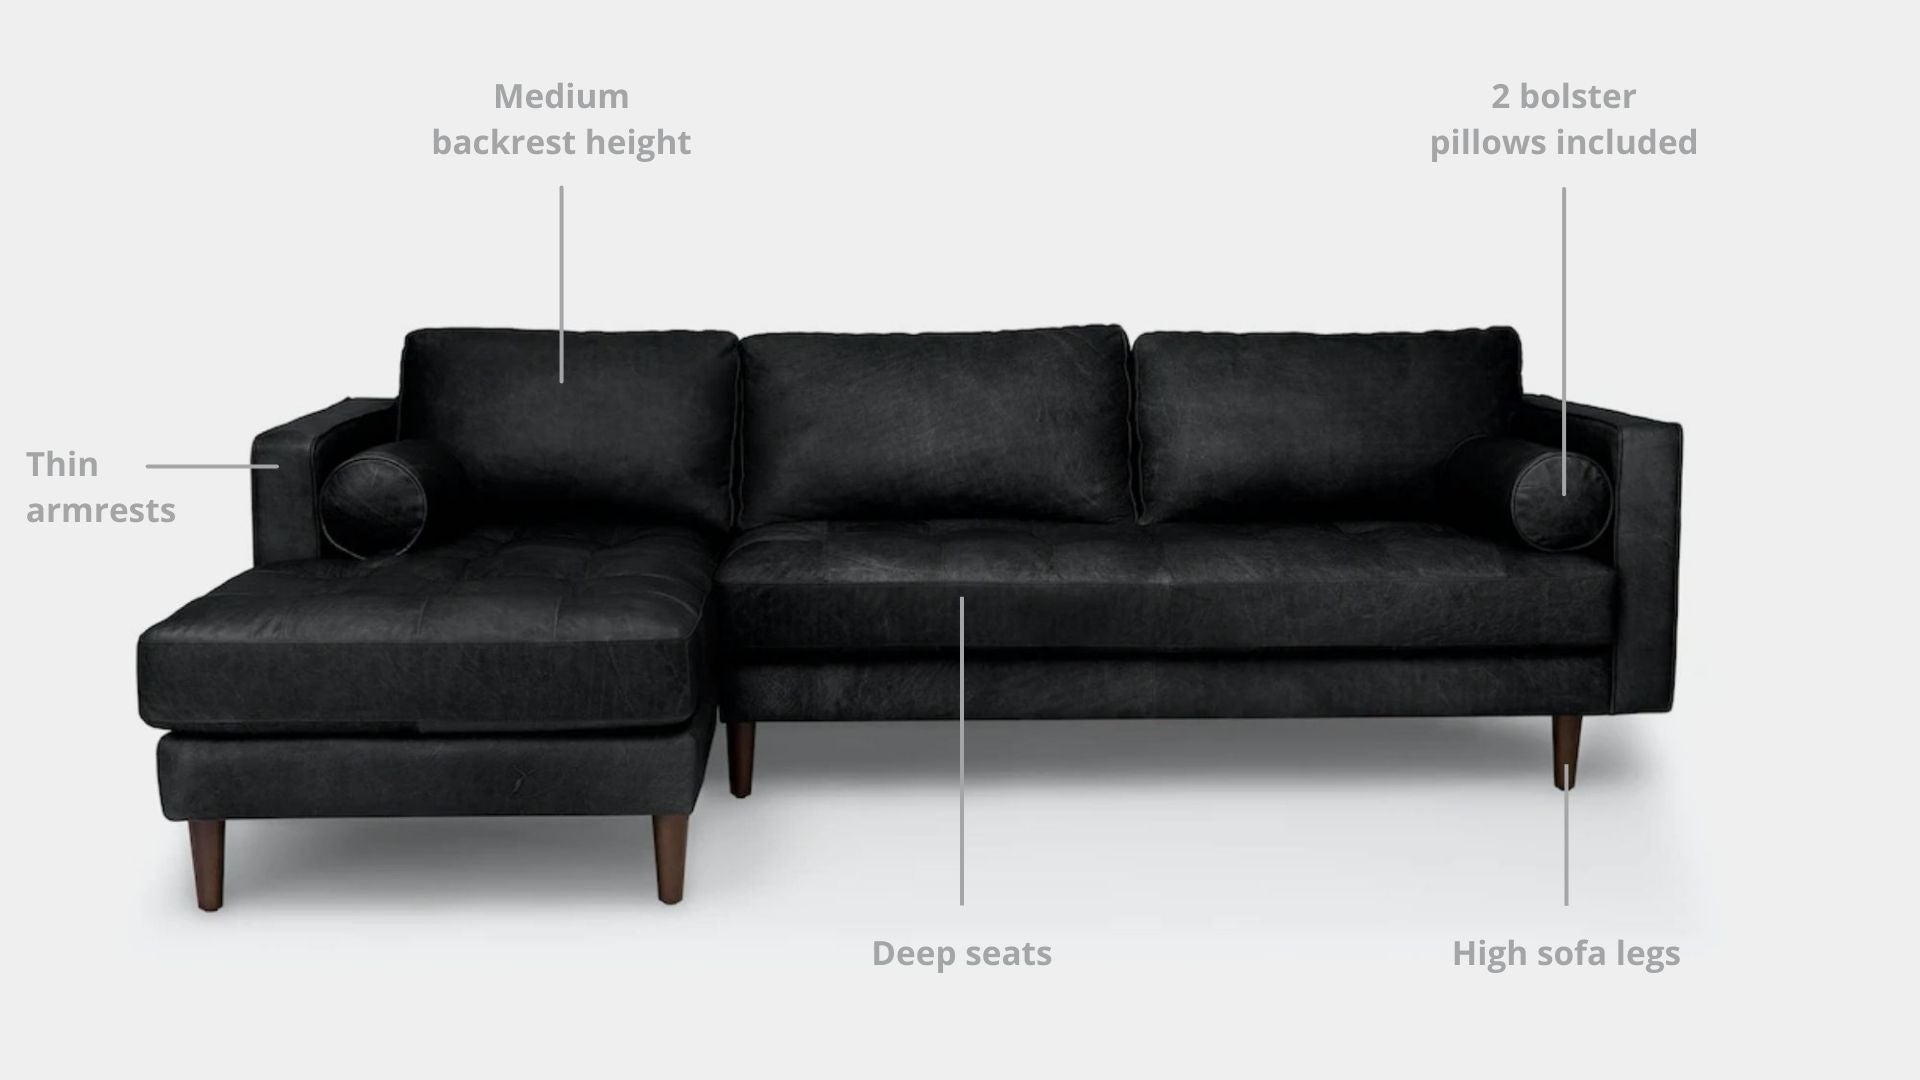 Key features such as armrest thickness, cushion height, seat depth and sofa leg height for Castle Half Leather Sectional Sofa